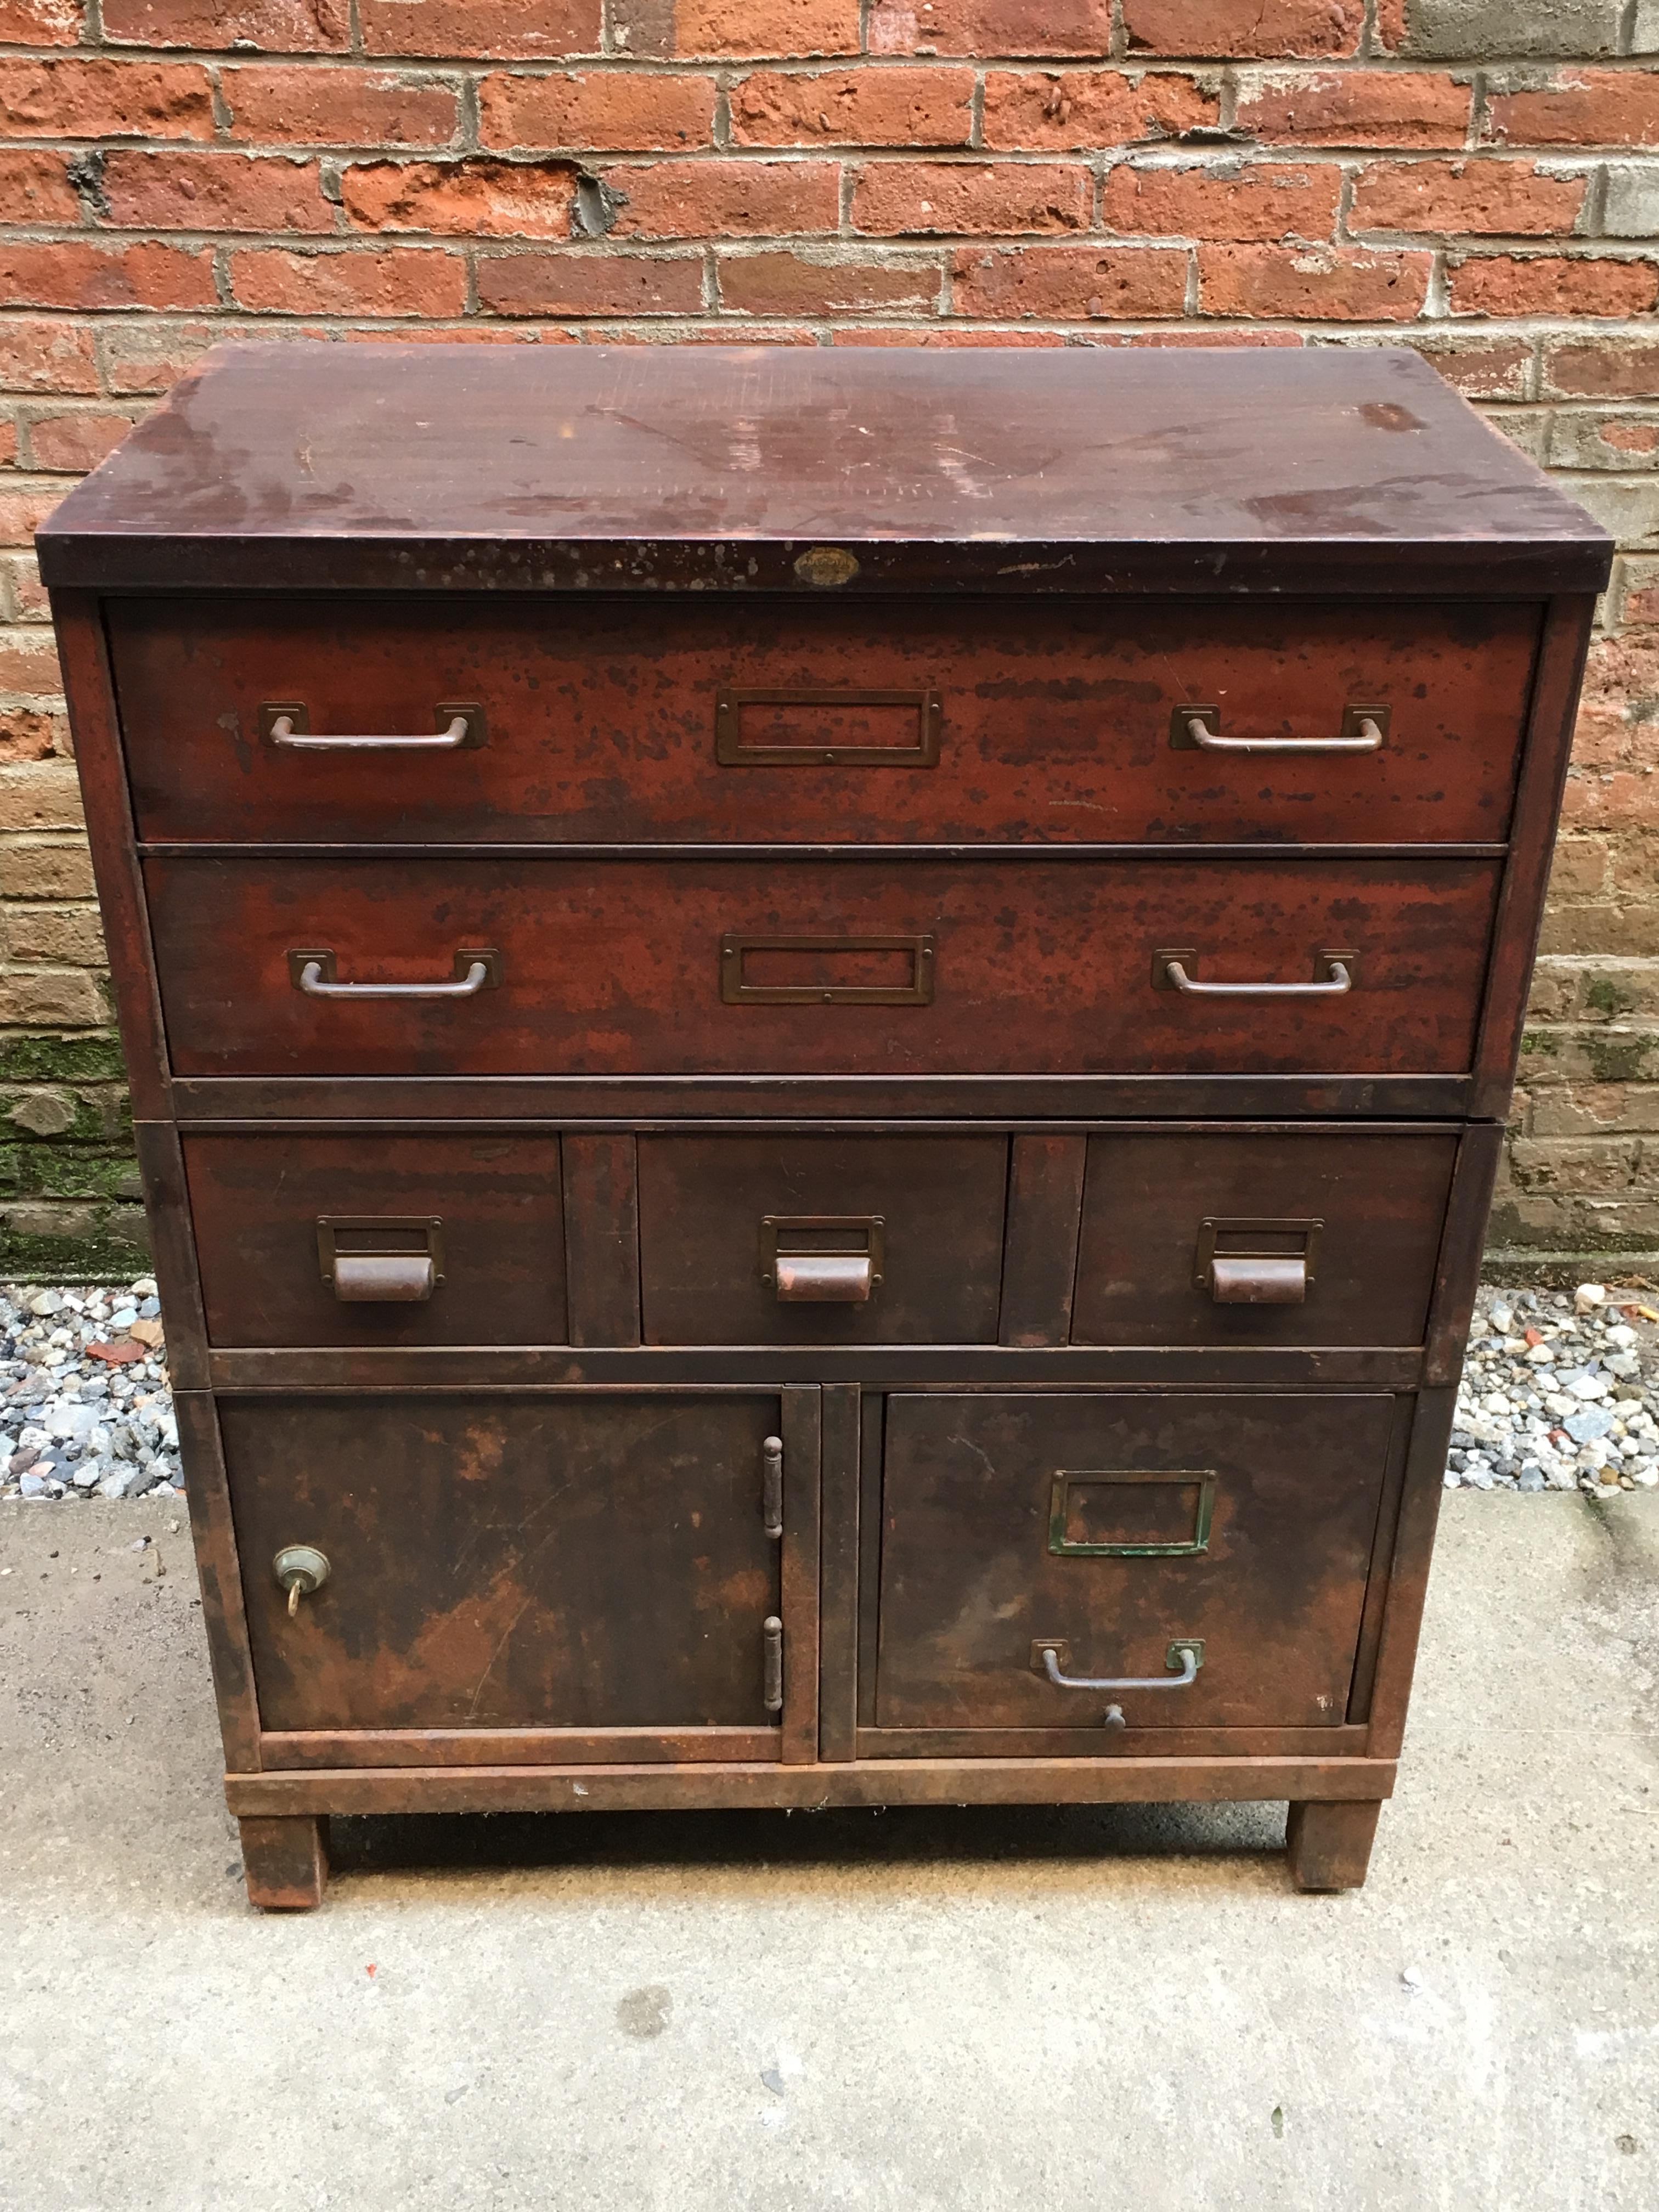 1920s Industrial Art Metal Modular Utility Cabinet In Distressed Condition In Garnerville, NY